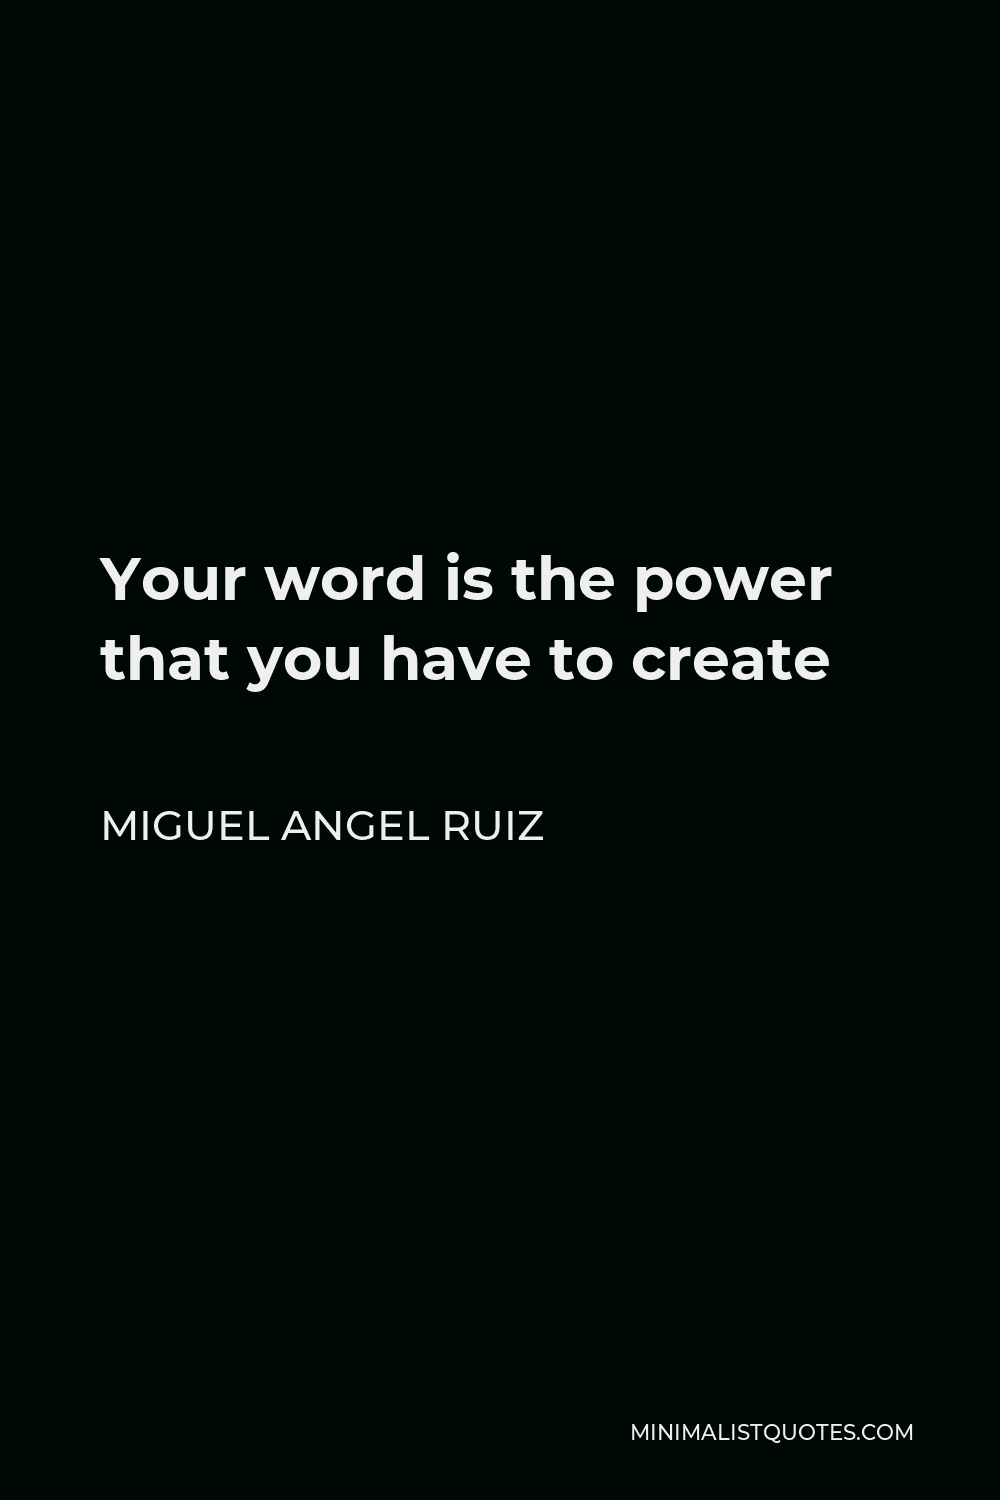 Miguel Angel Ruiz Quote - Your word is the power that you have to create